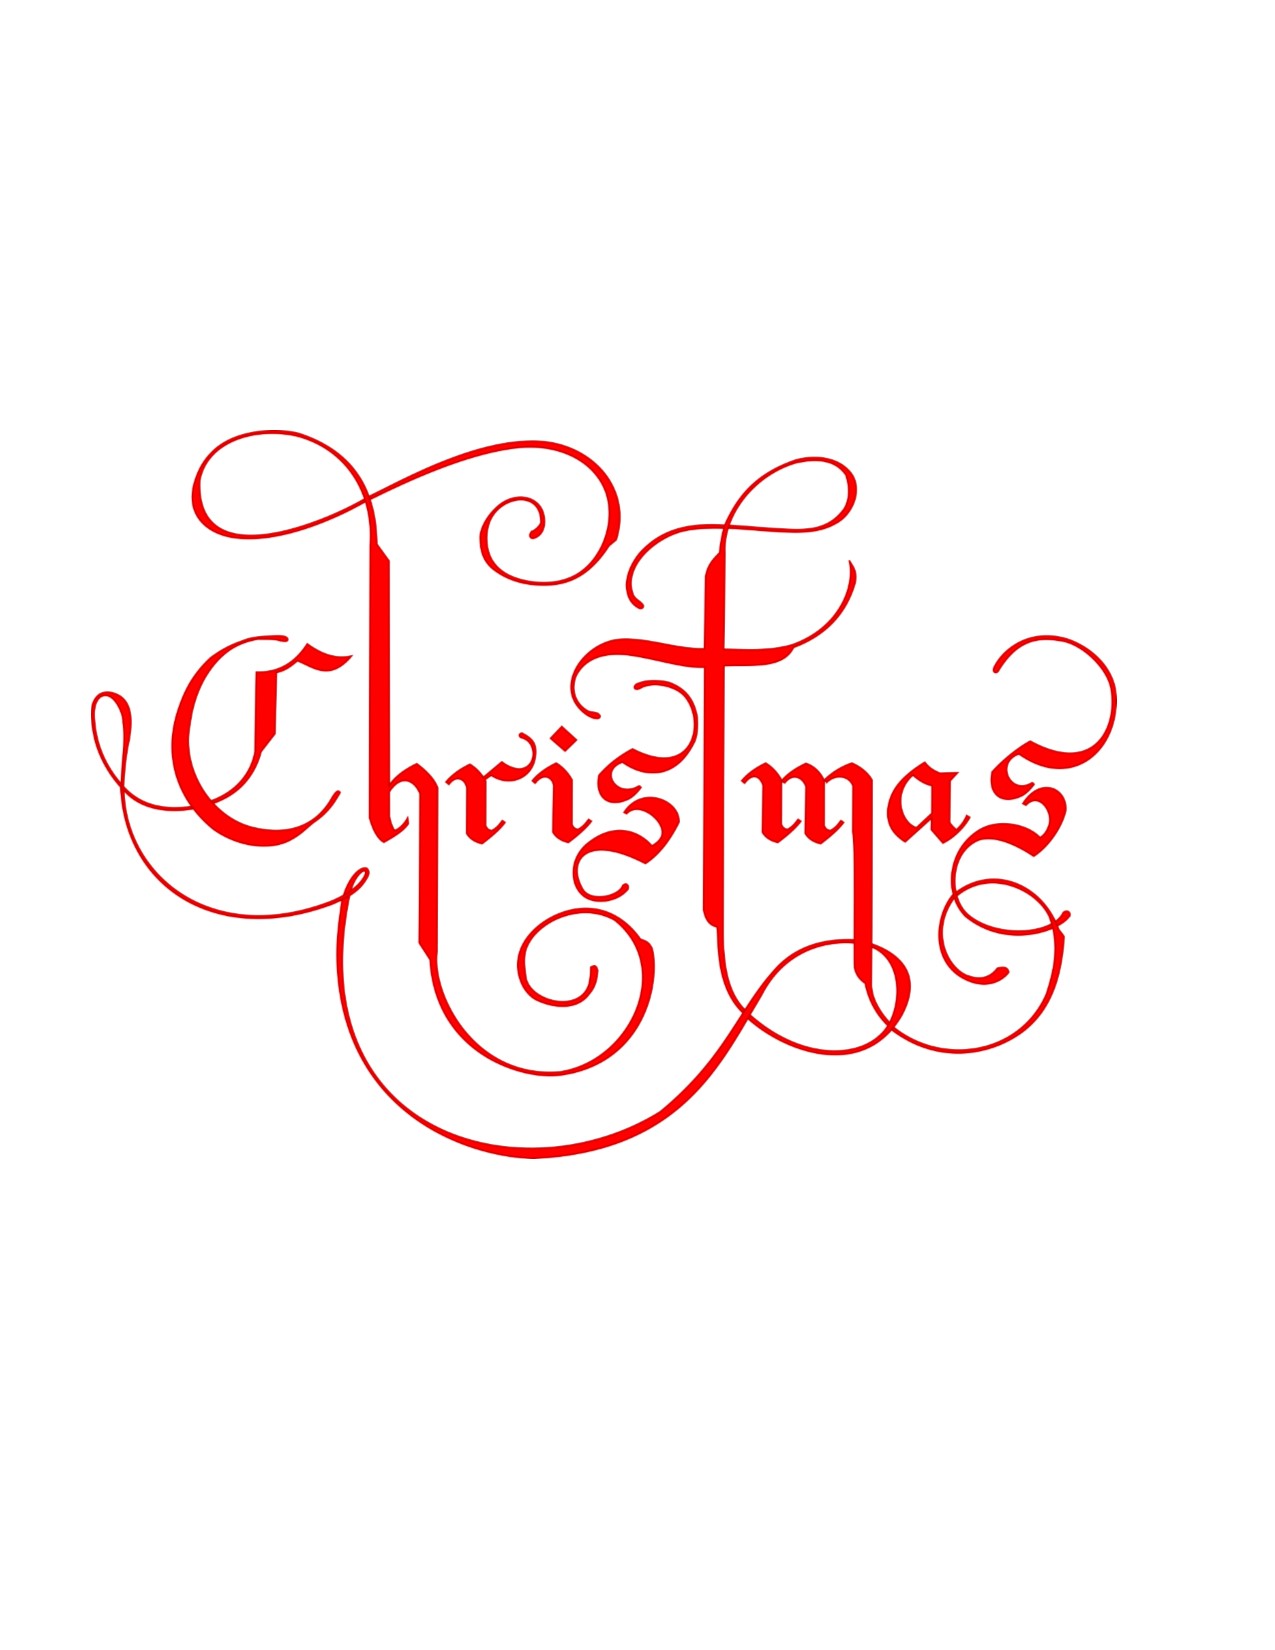 Red writing spelling Christmas